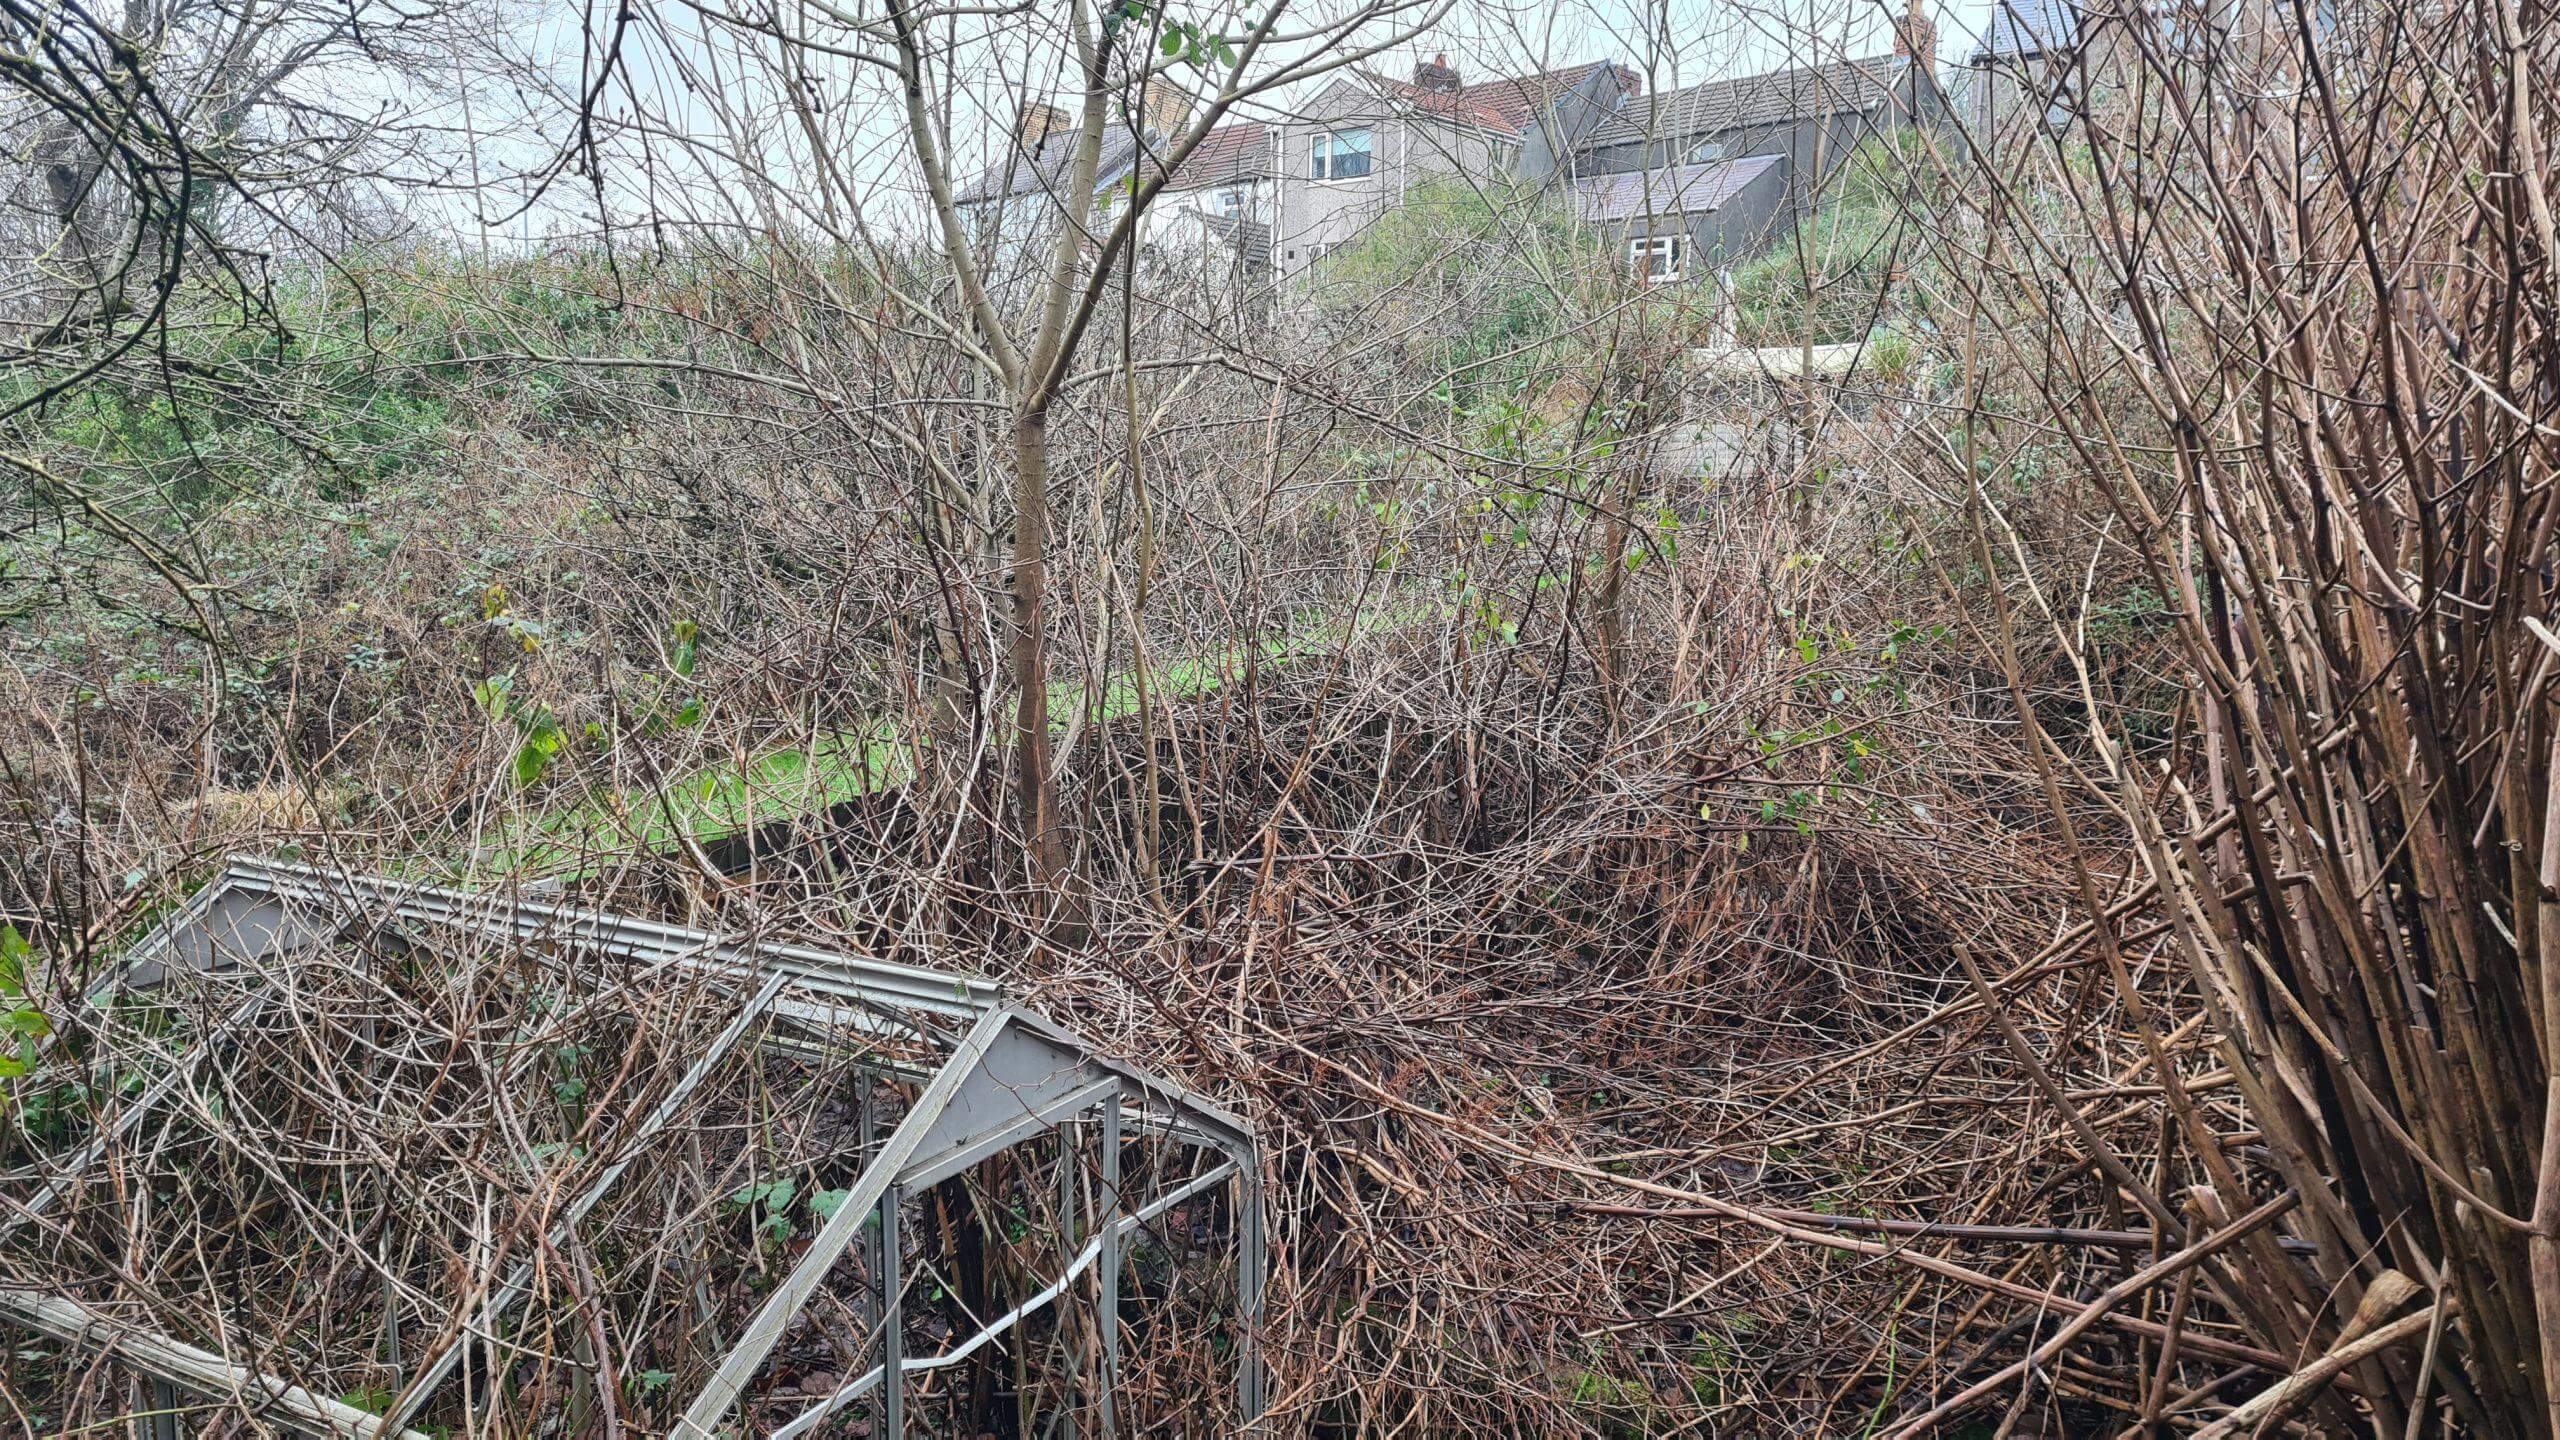 Garden in early Spring and ready for site clearance of Japanese knotweed stems